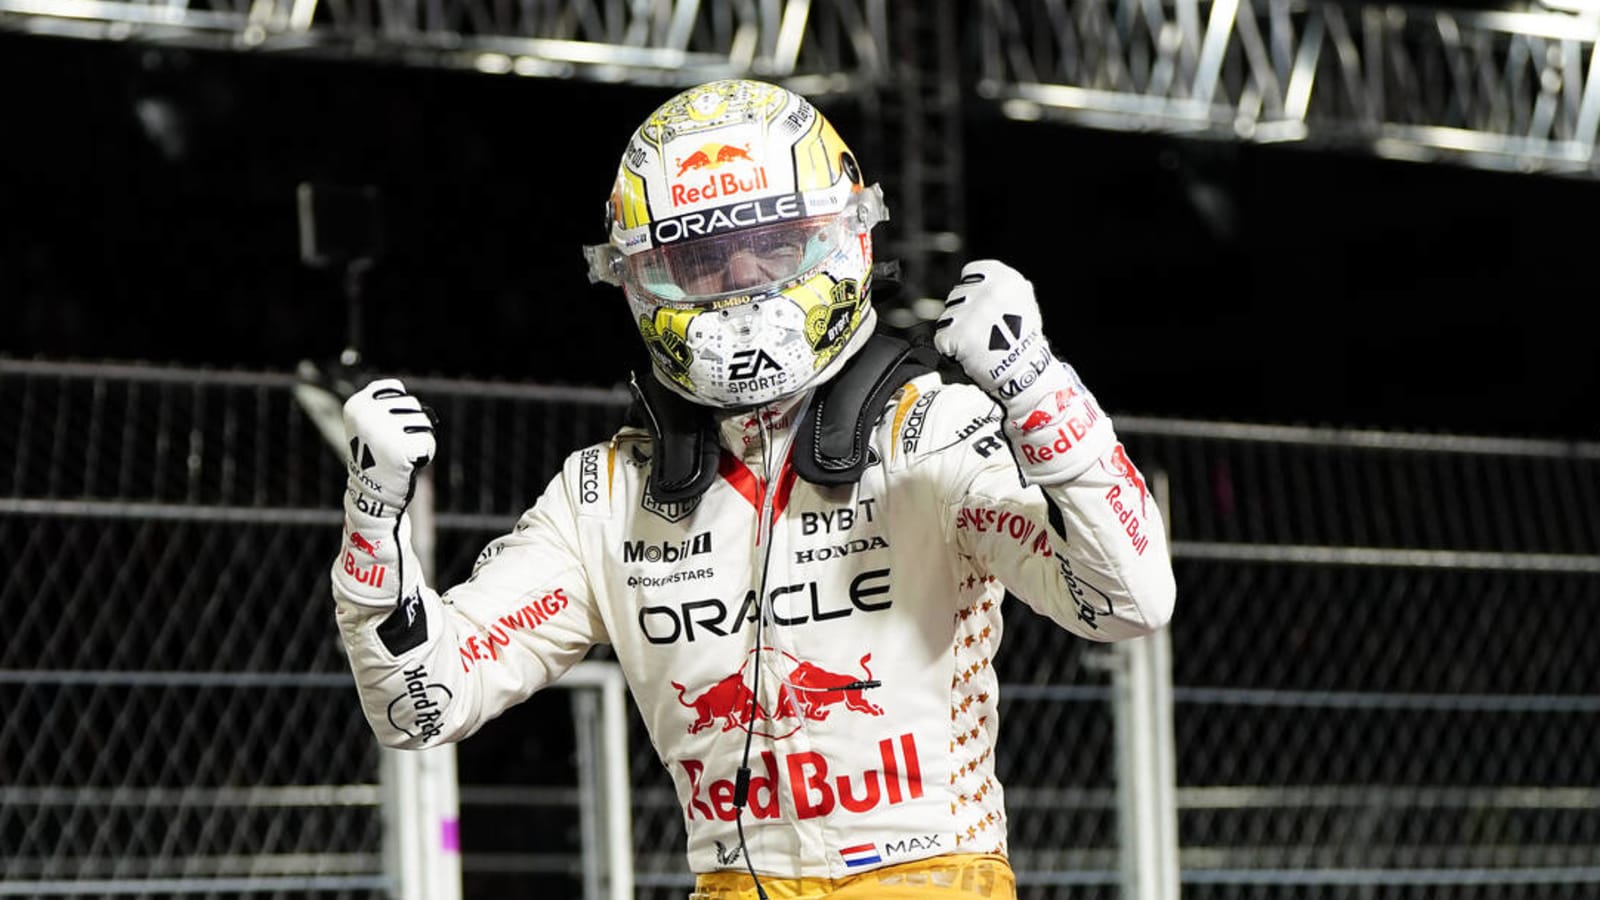 Red Bull returns to form with 1-2 finish at Suzuka